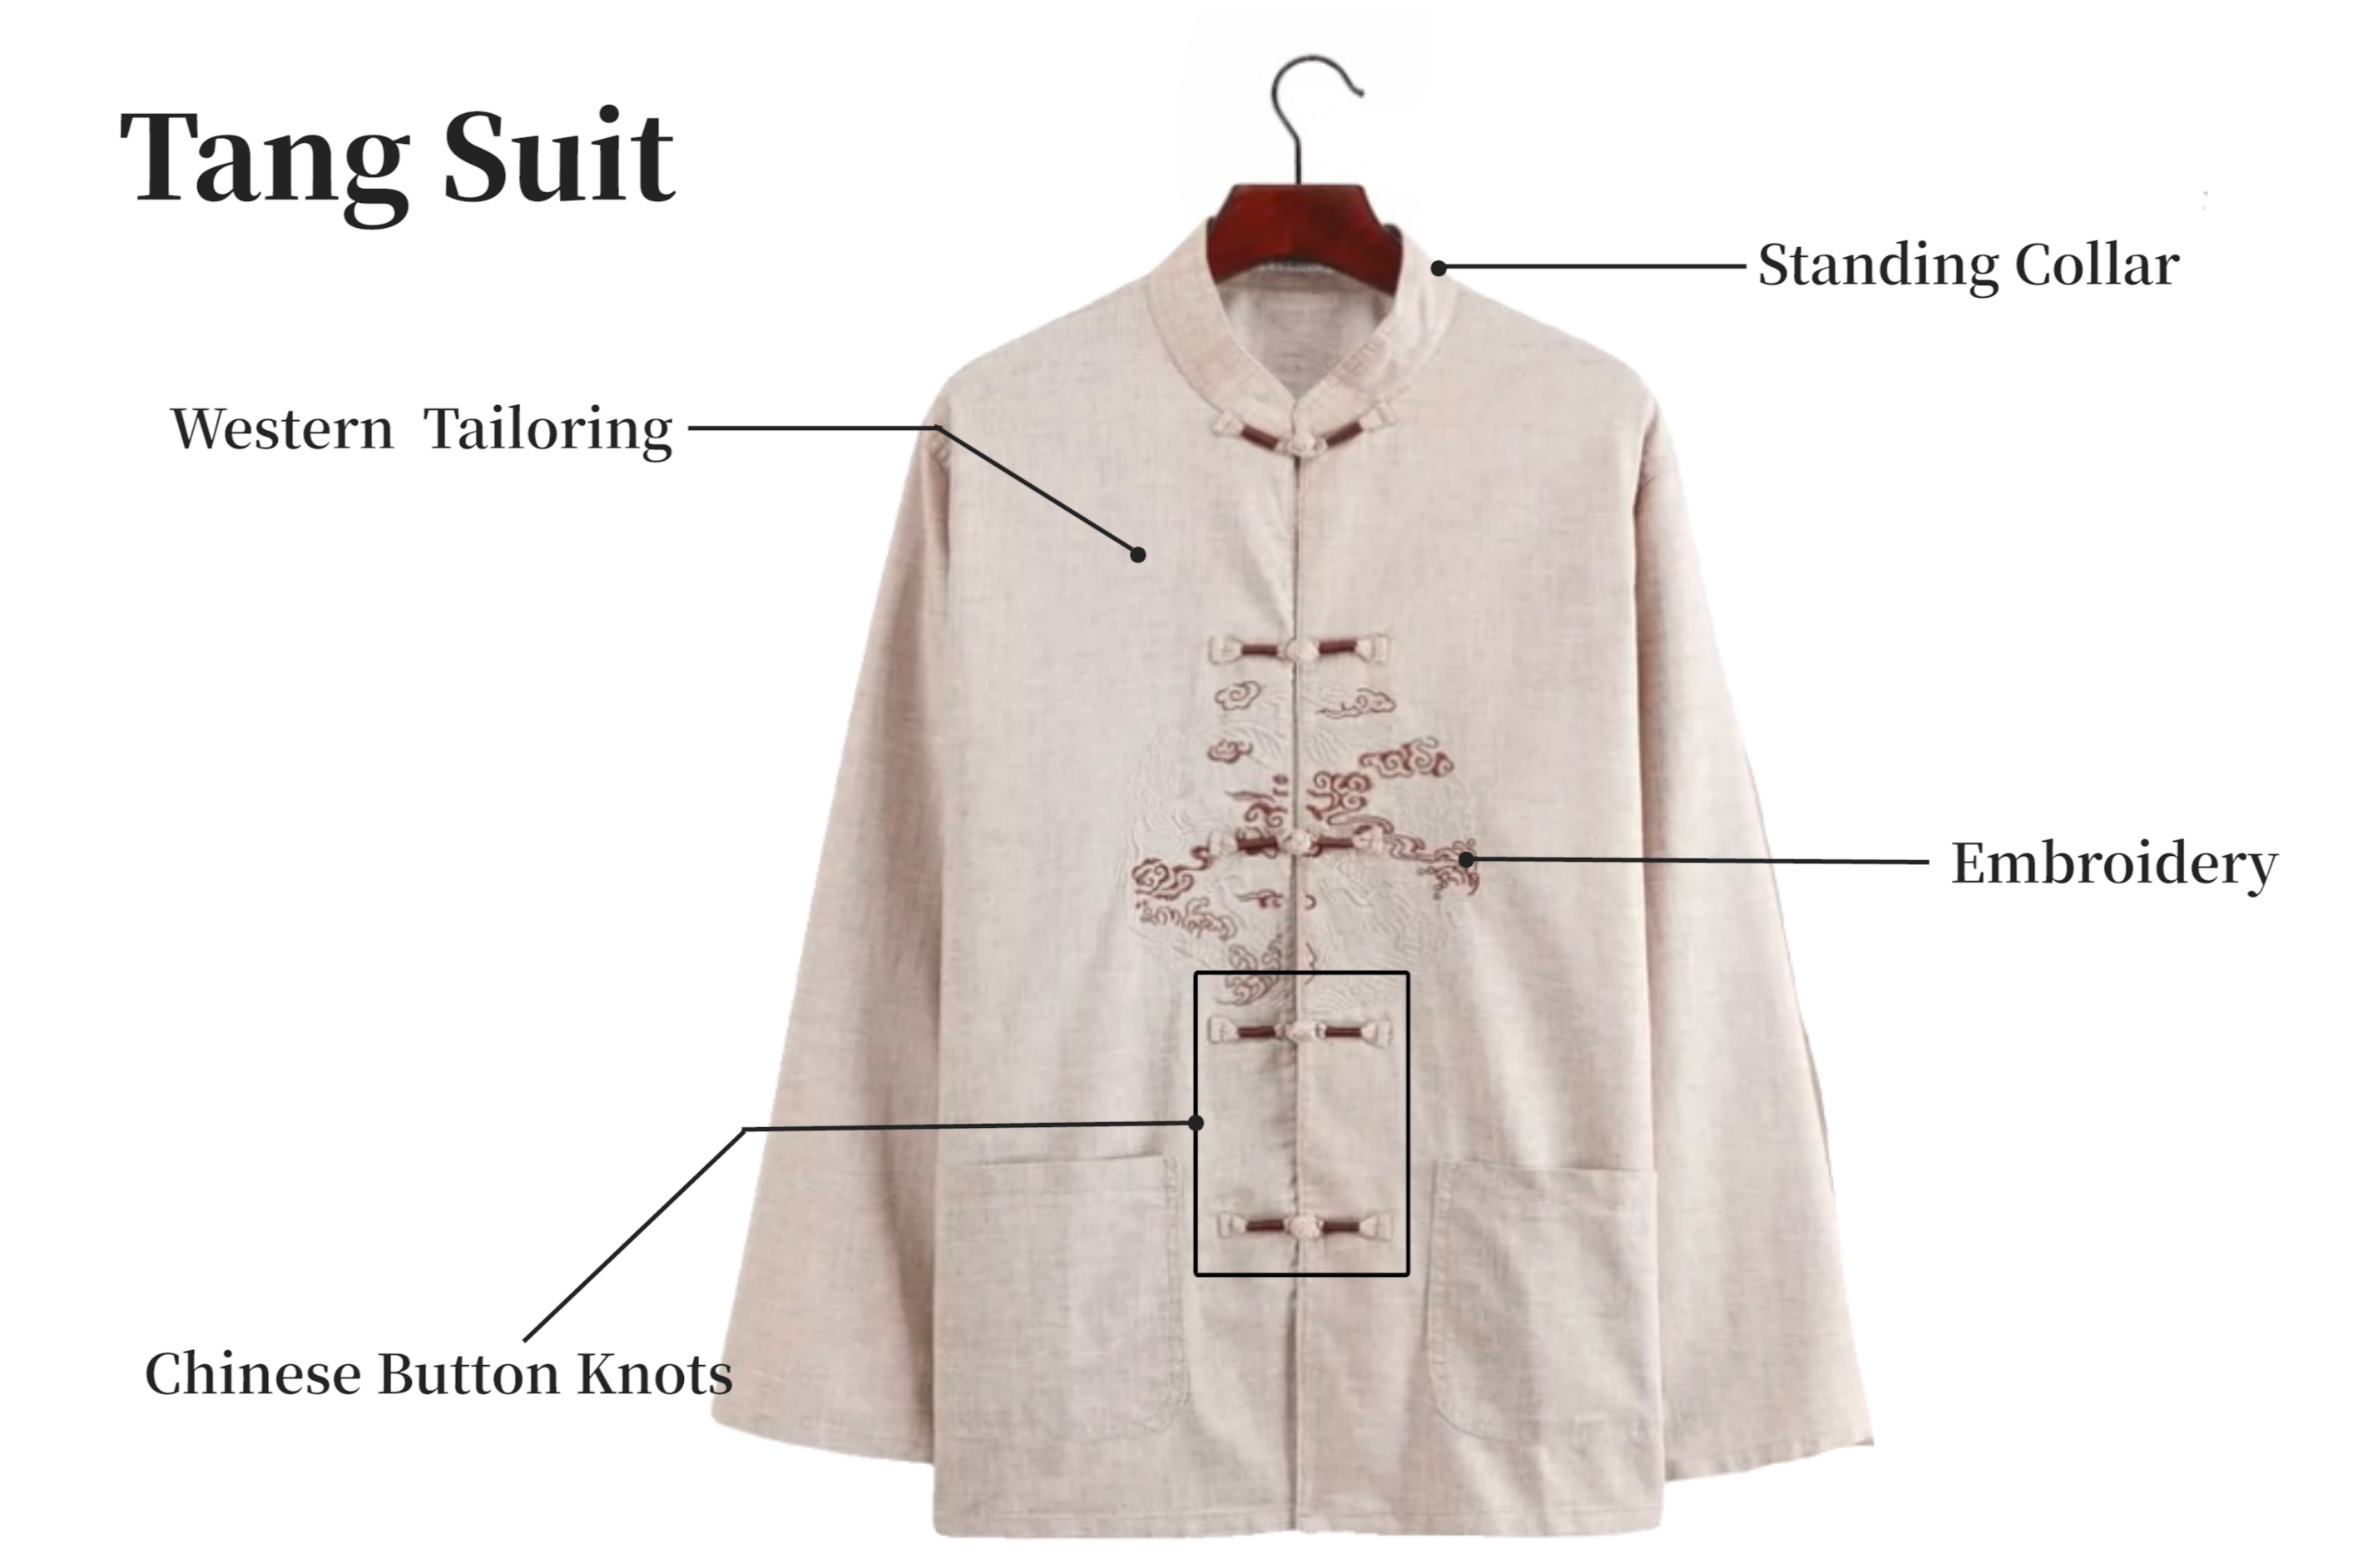 characteristics of tang suit